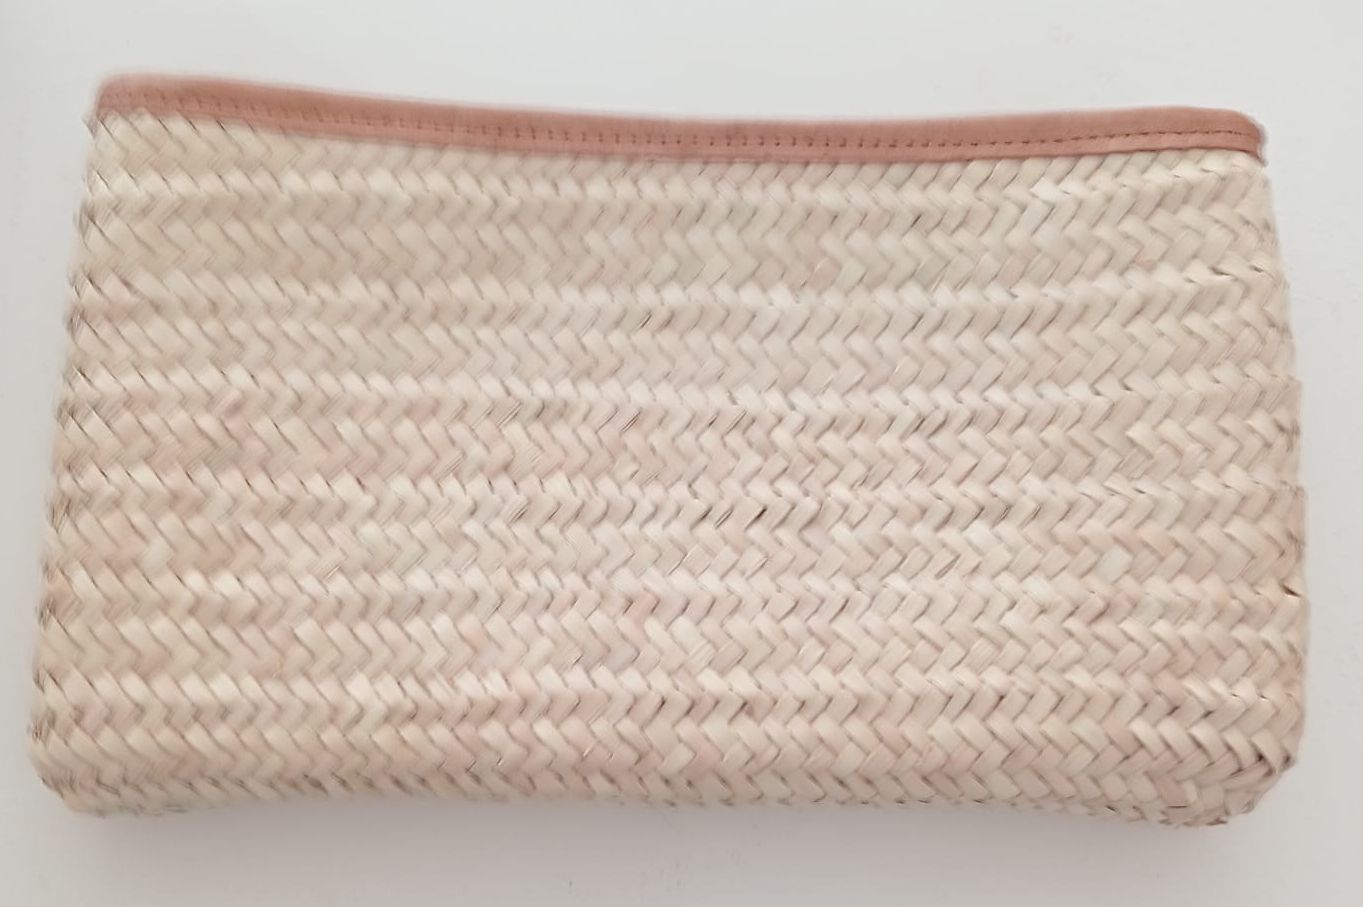 Rectangular hand-woven clutch bag in palm leaves with wool embroidery, Eye of Allah motif